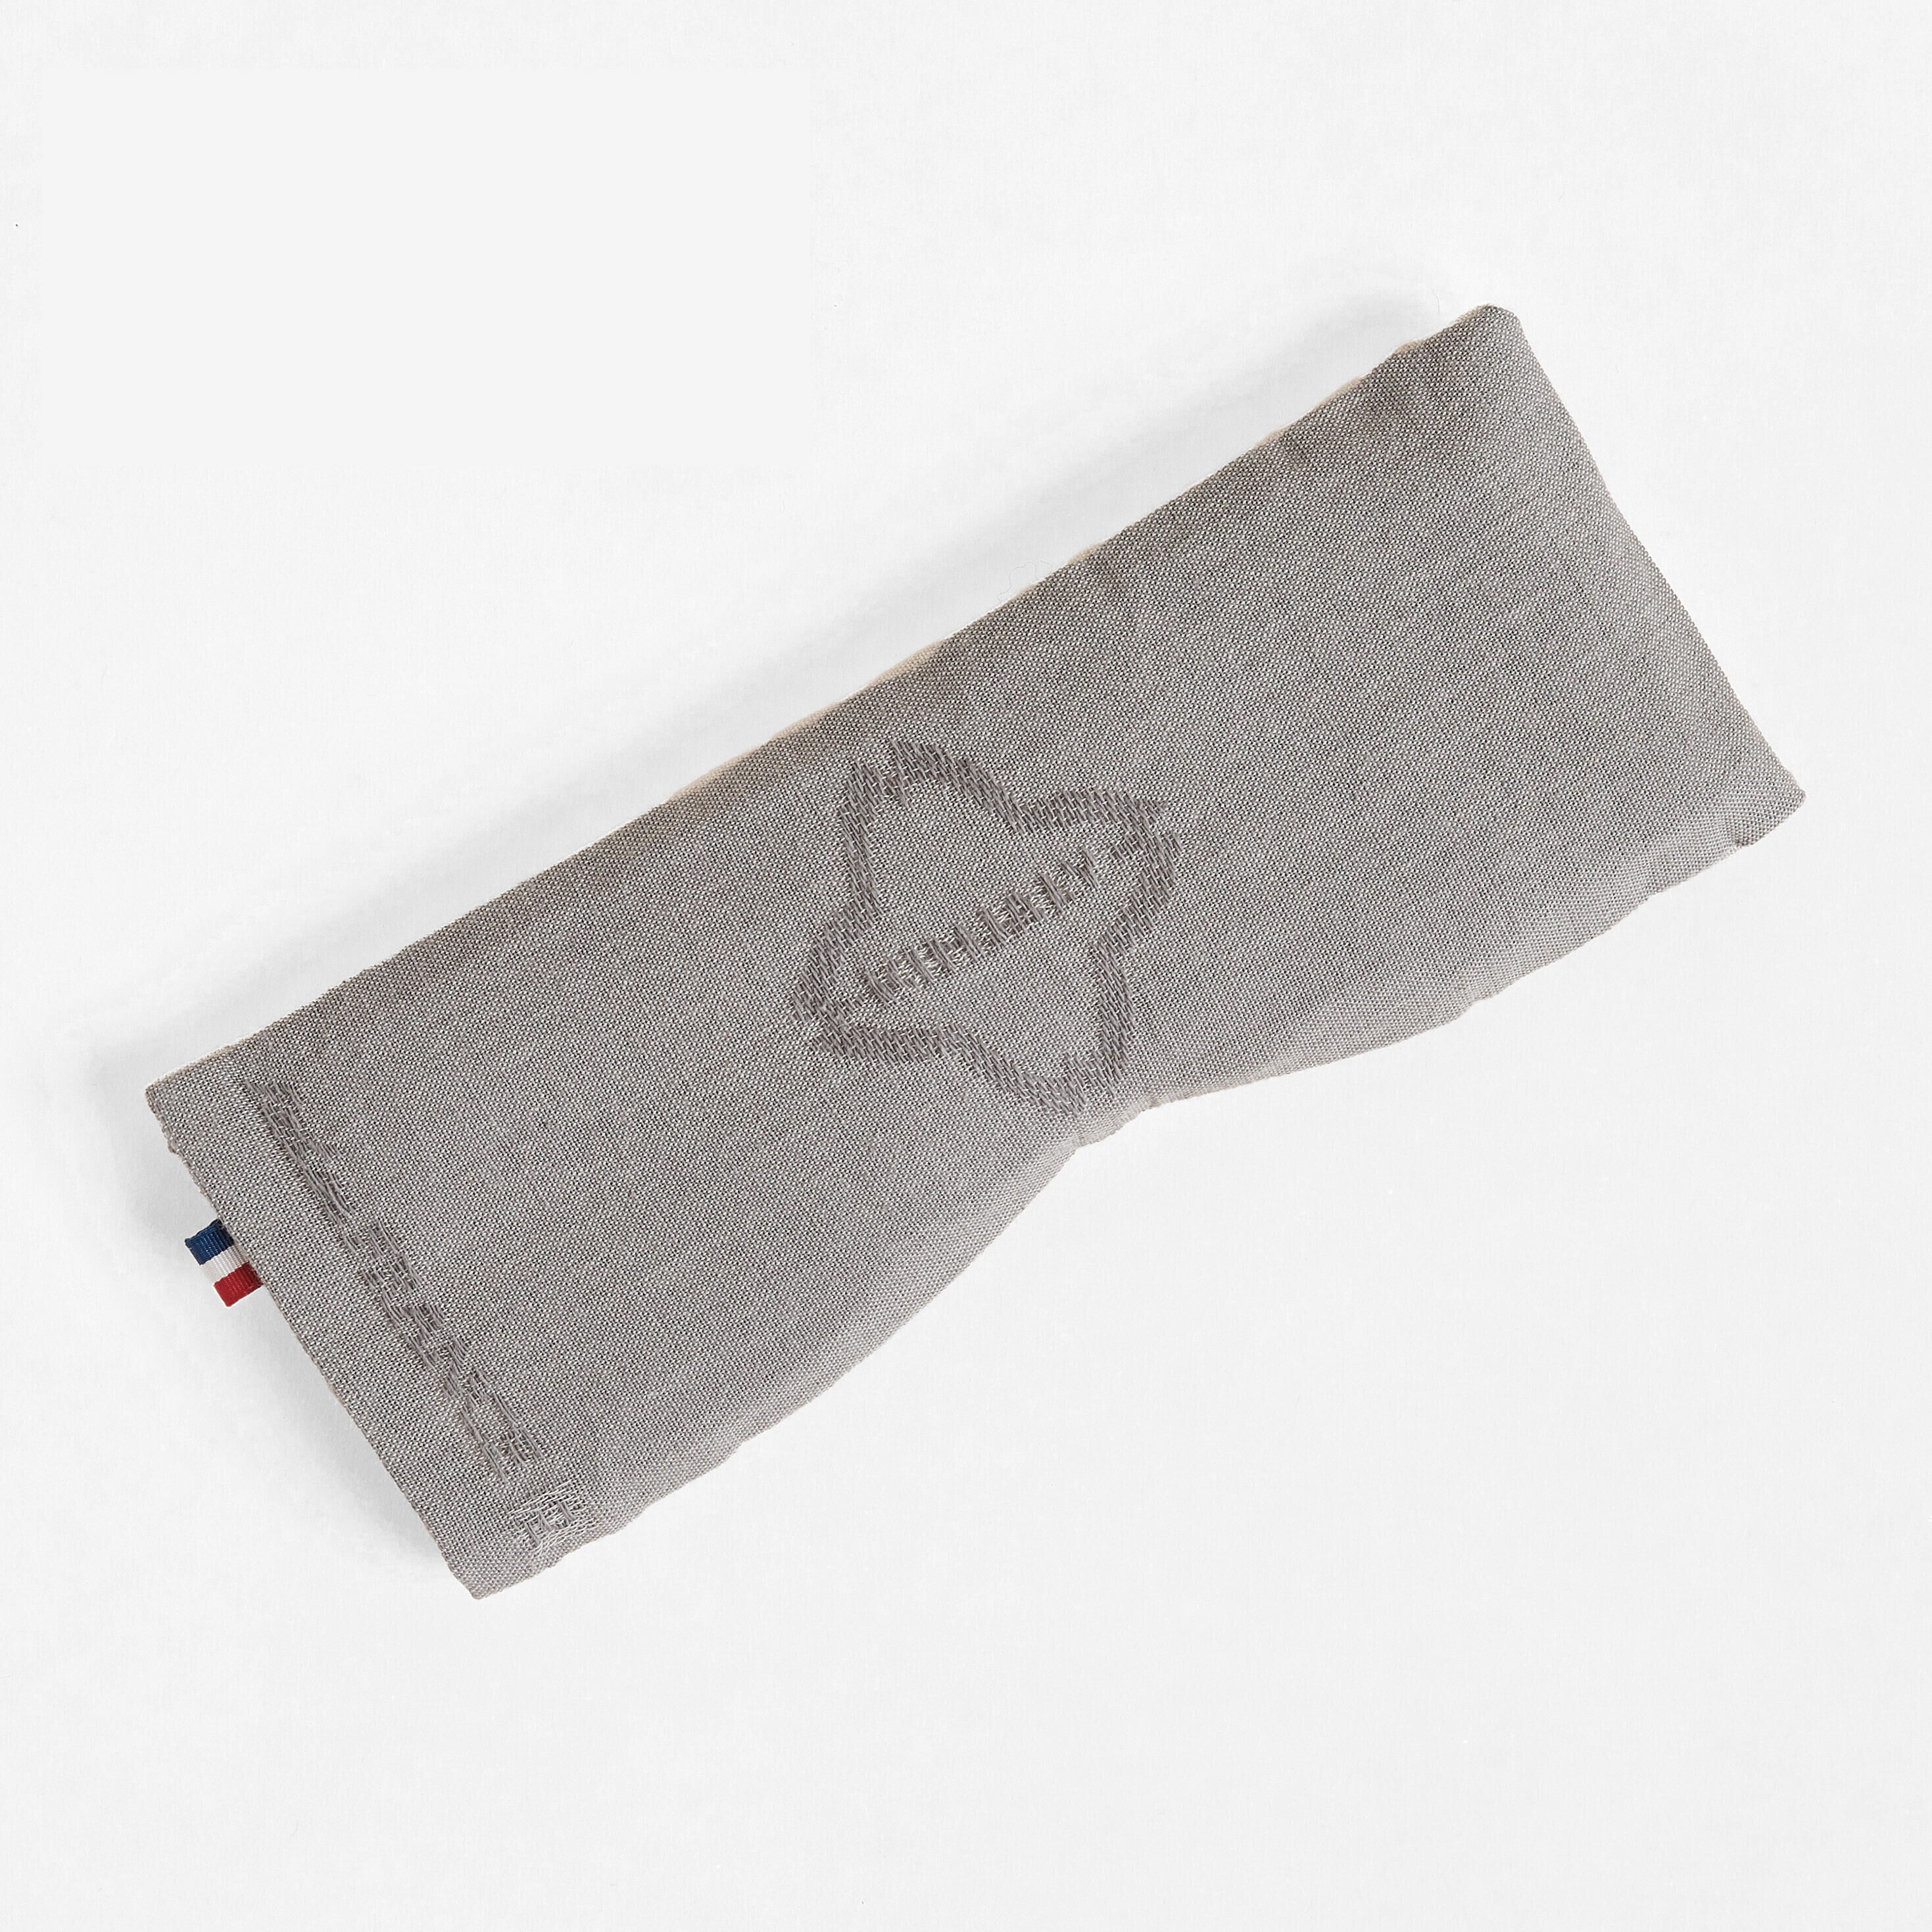 KIMJALY Yoga Eye Pillow Made In France